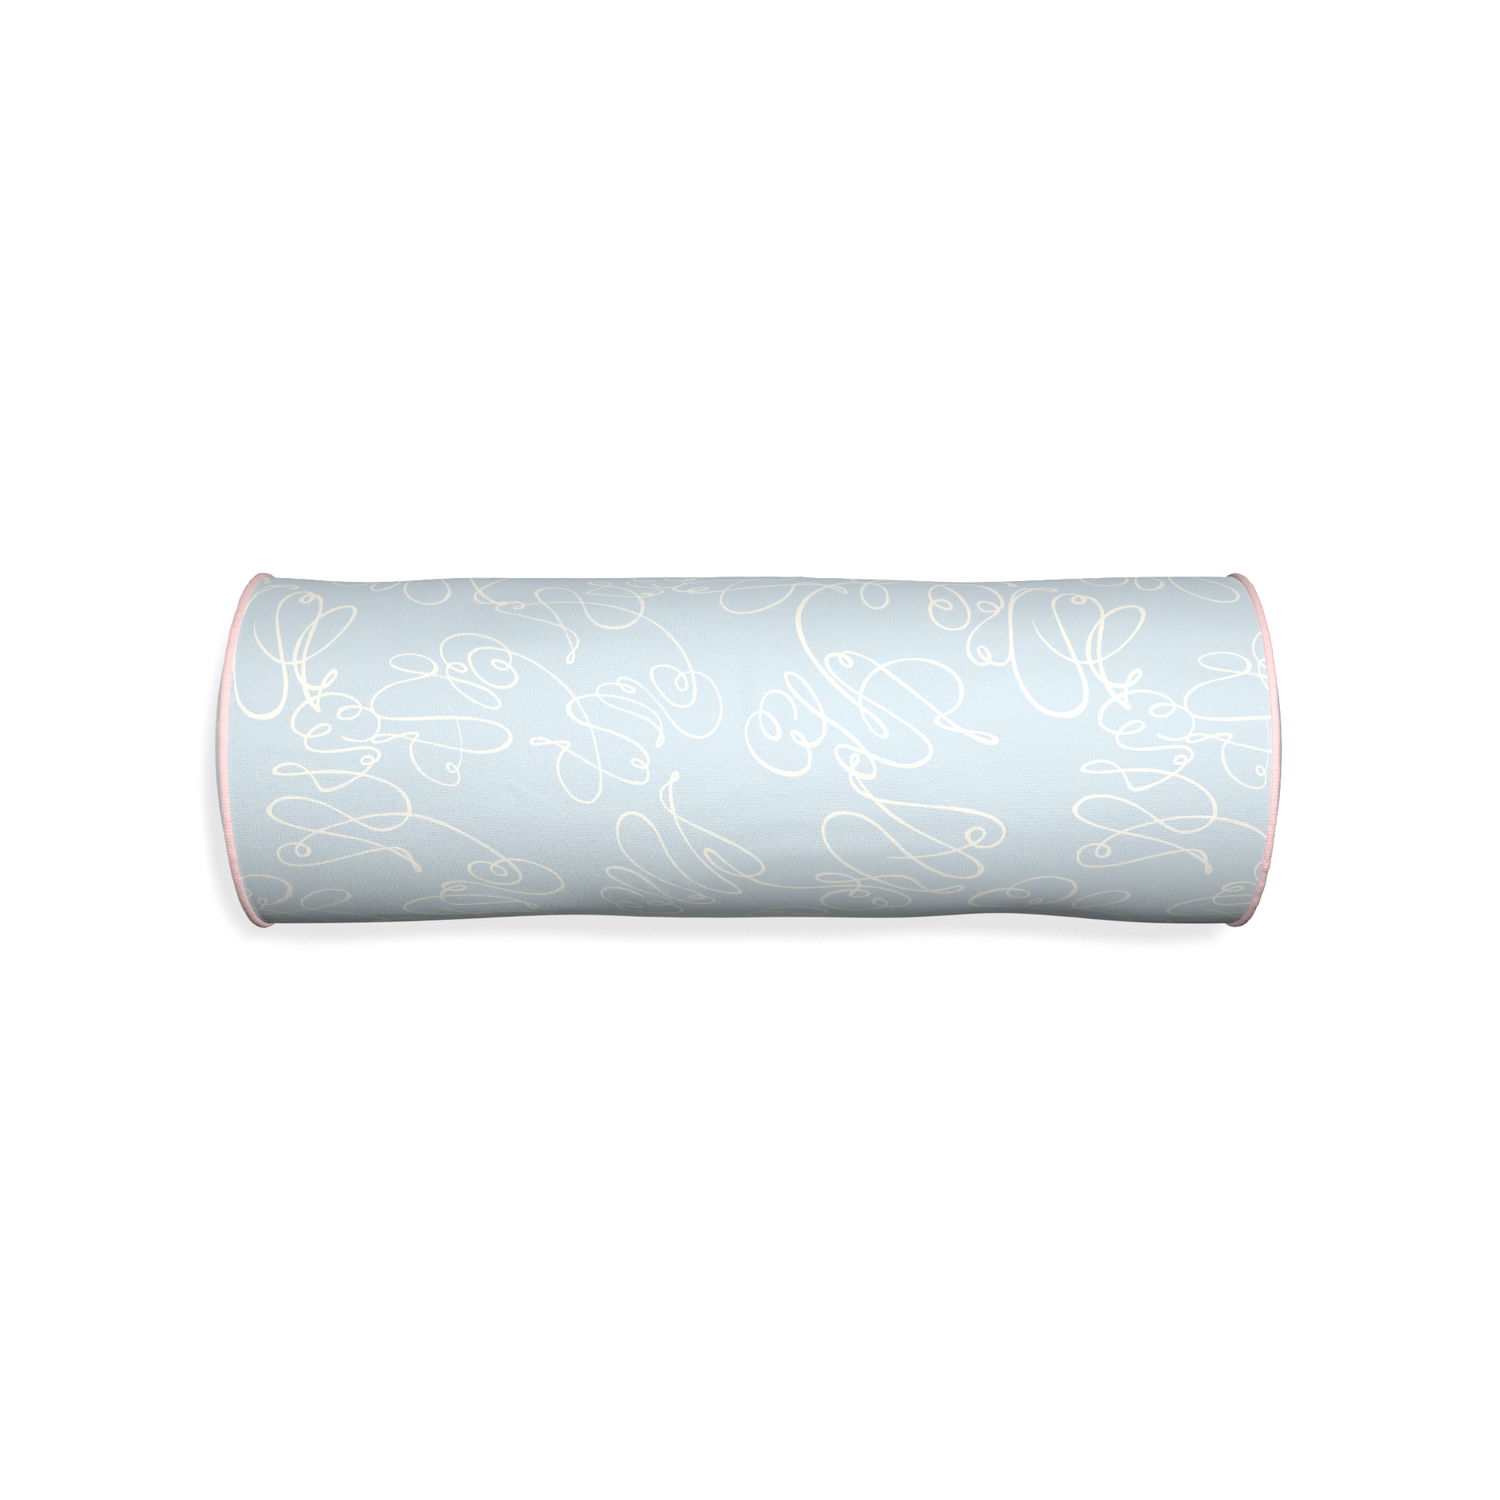 Bolster mirabella custom powder blue abstractpillow with petal piping on white background